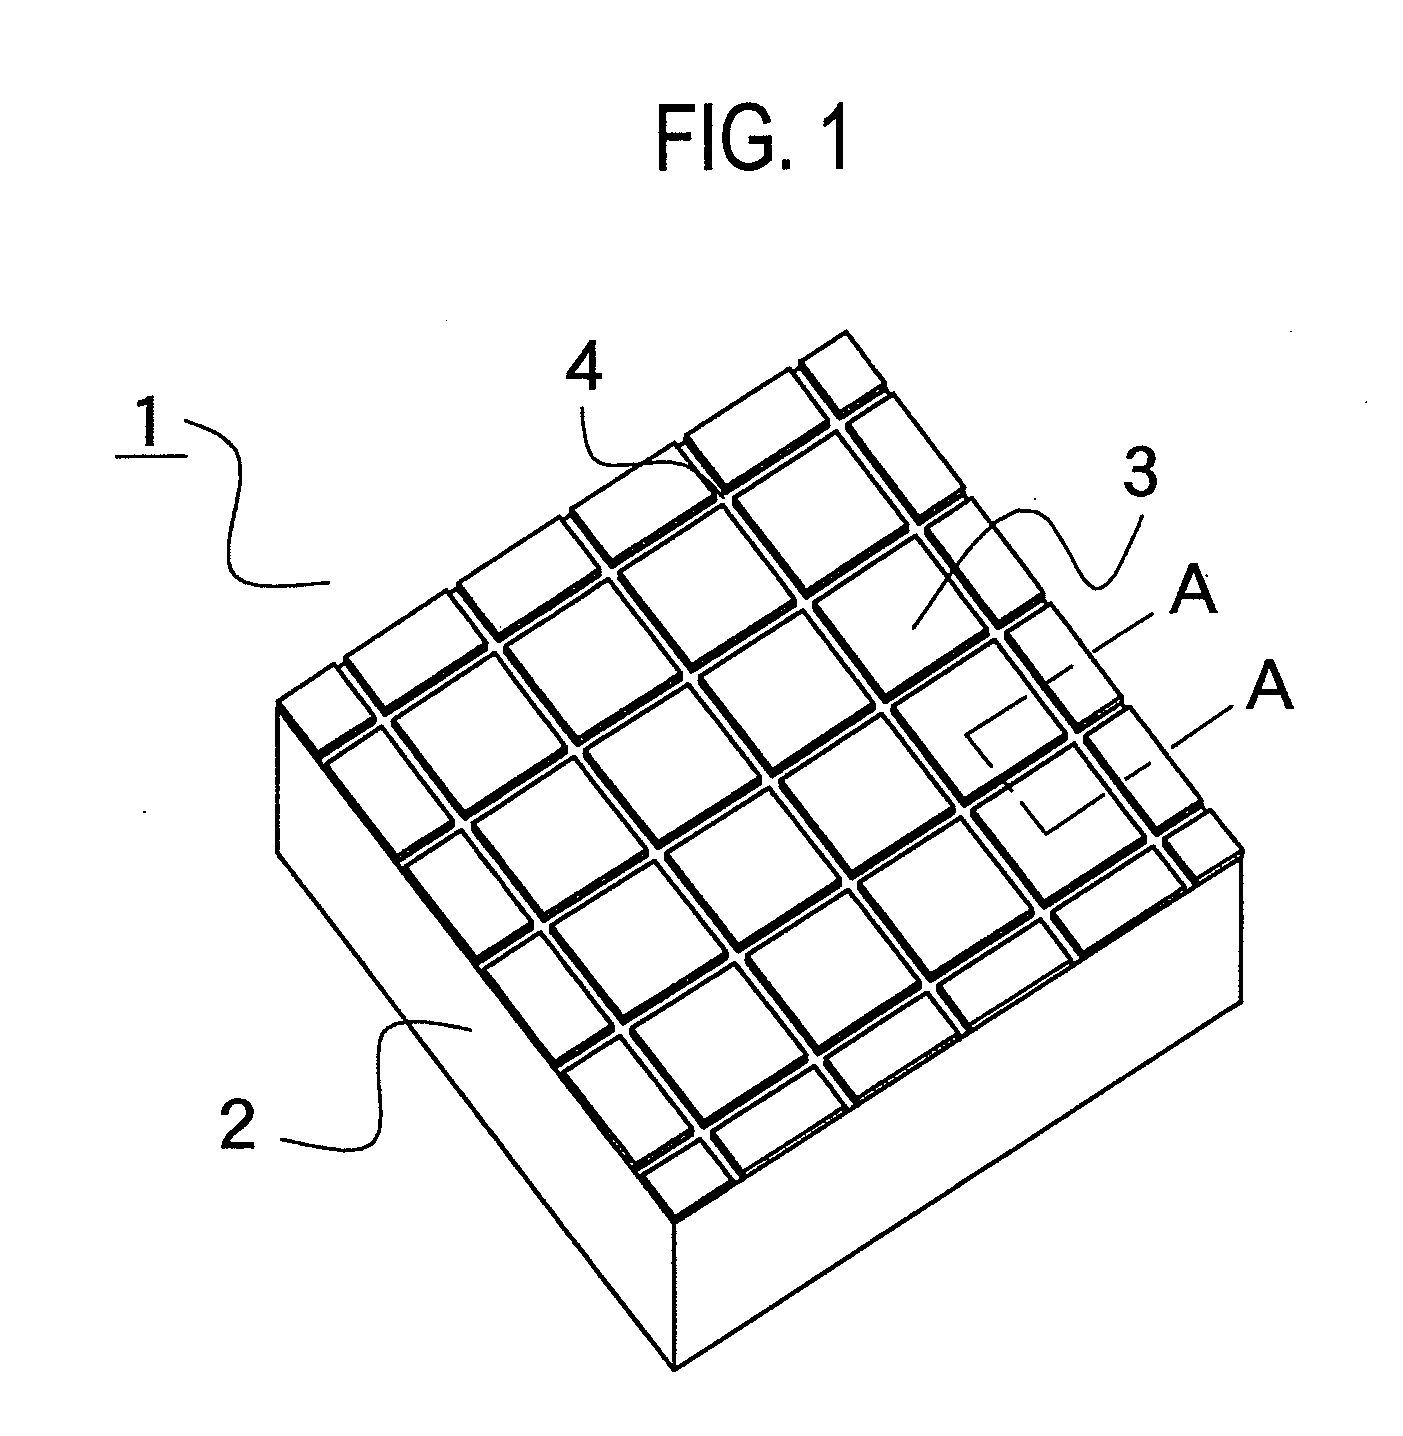 Engraved plate and substrate with conductor layer pattern using the same